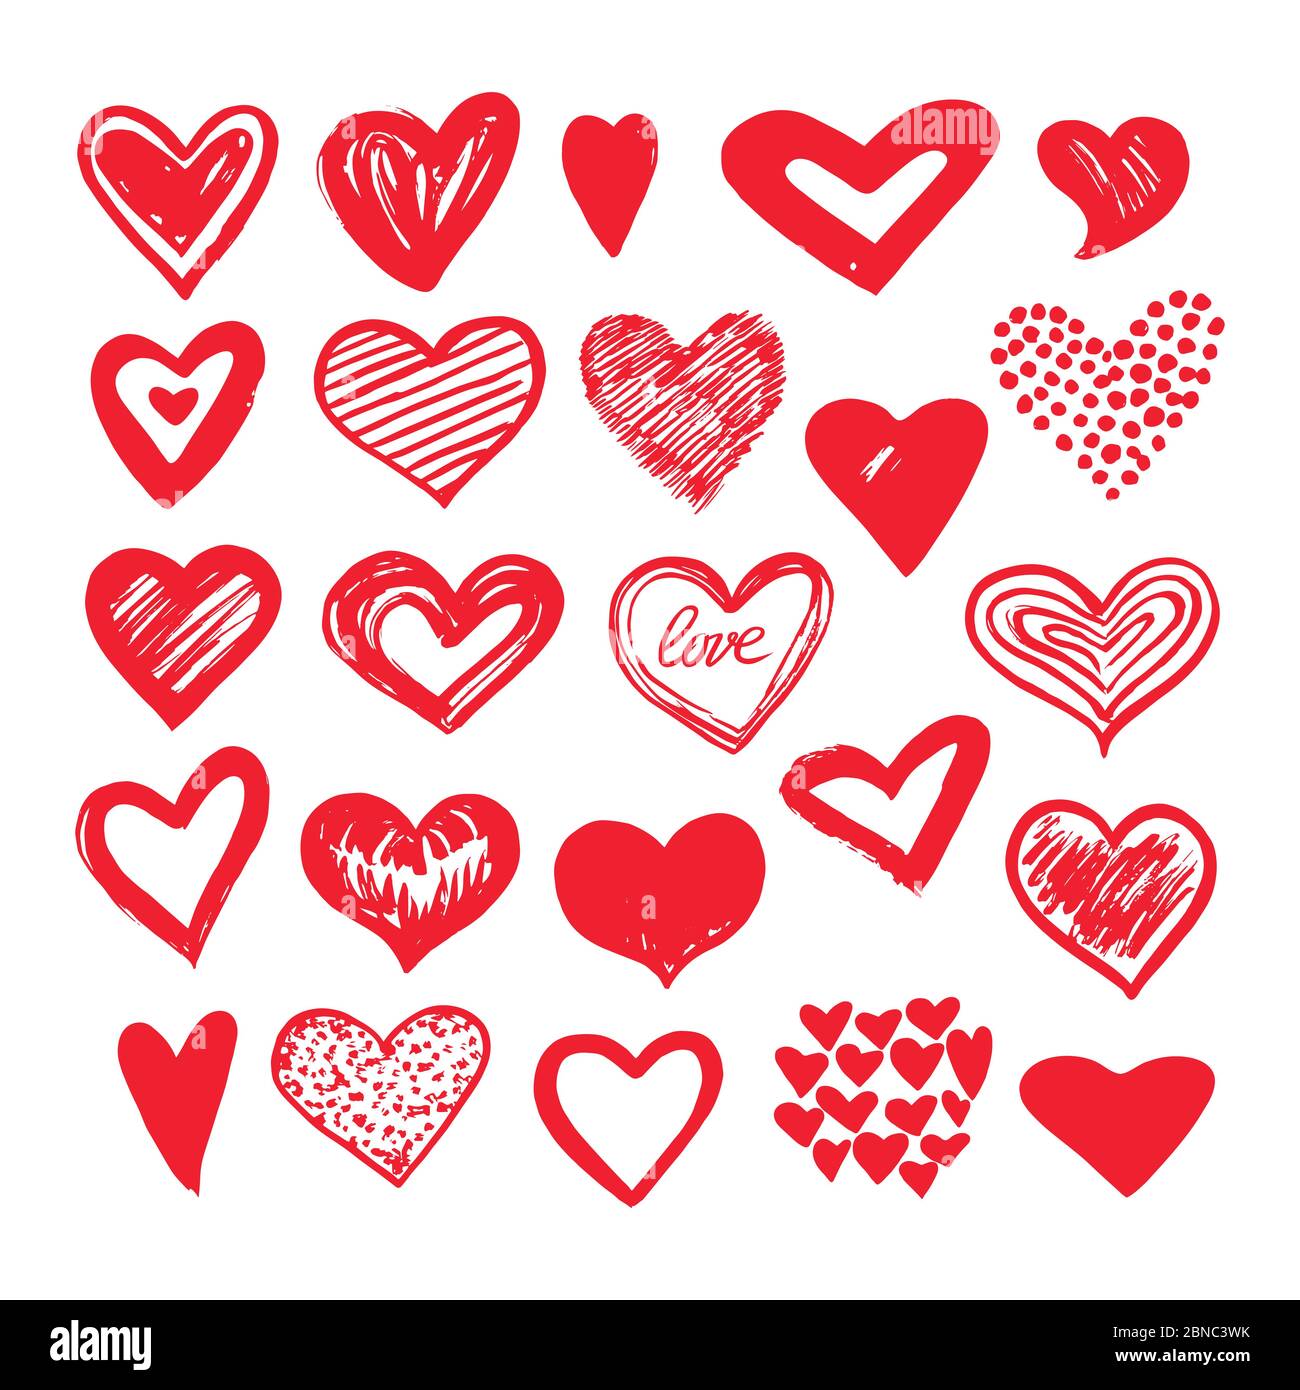 Love elements Stock Vector Images - Alamy